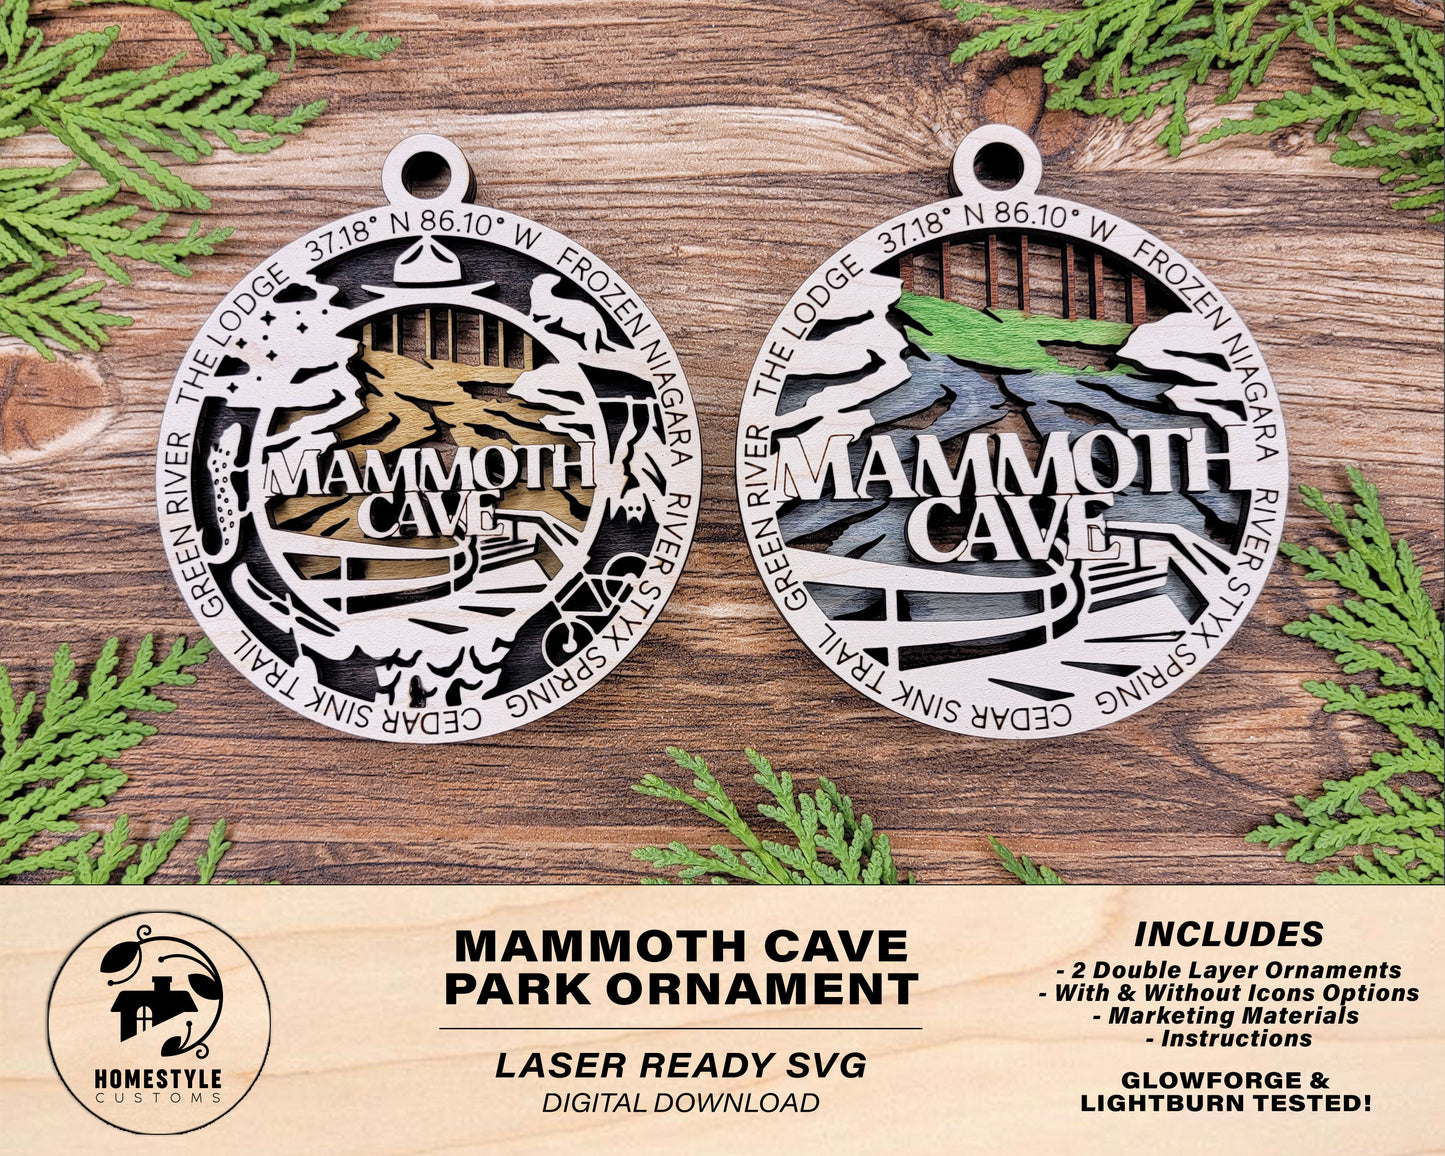 Mammoth Cave Park Ornament - Includes 2 Ornaments - Laser Design SVG, PDF, AI File Download - Tested On Glowforge and LightBurn